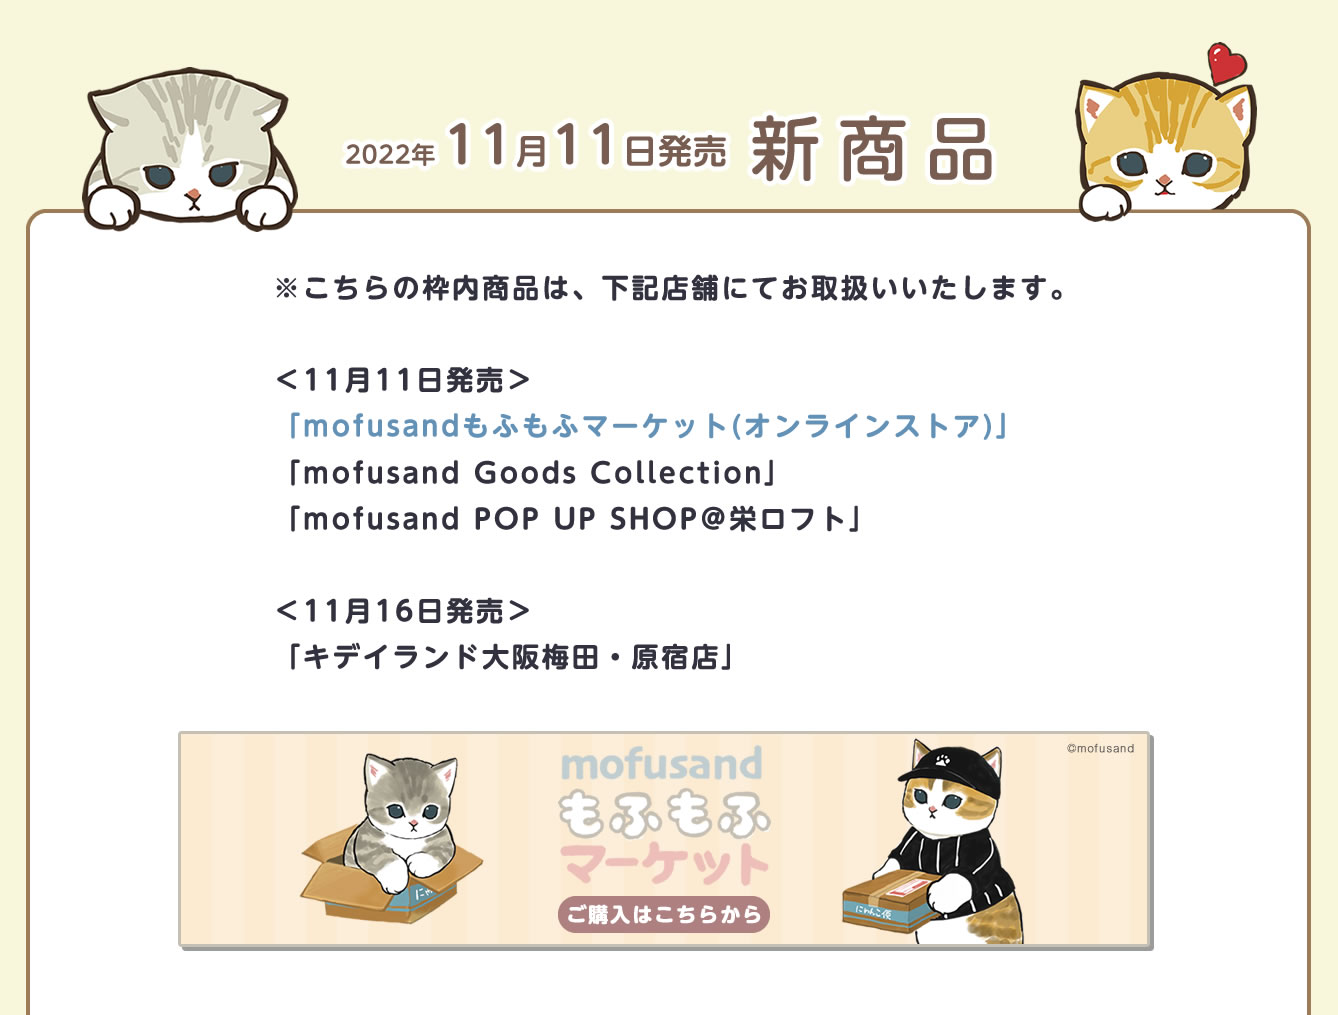 mofusand Goods Collection (2022/11/1(火)～)イベント情報